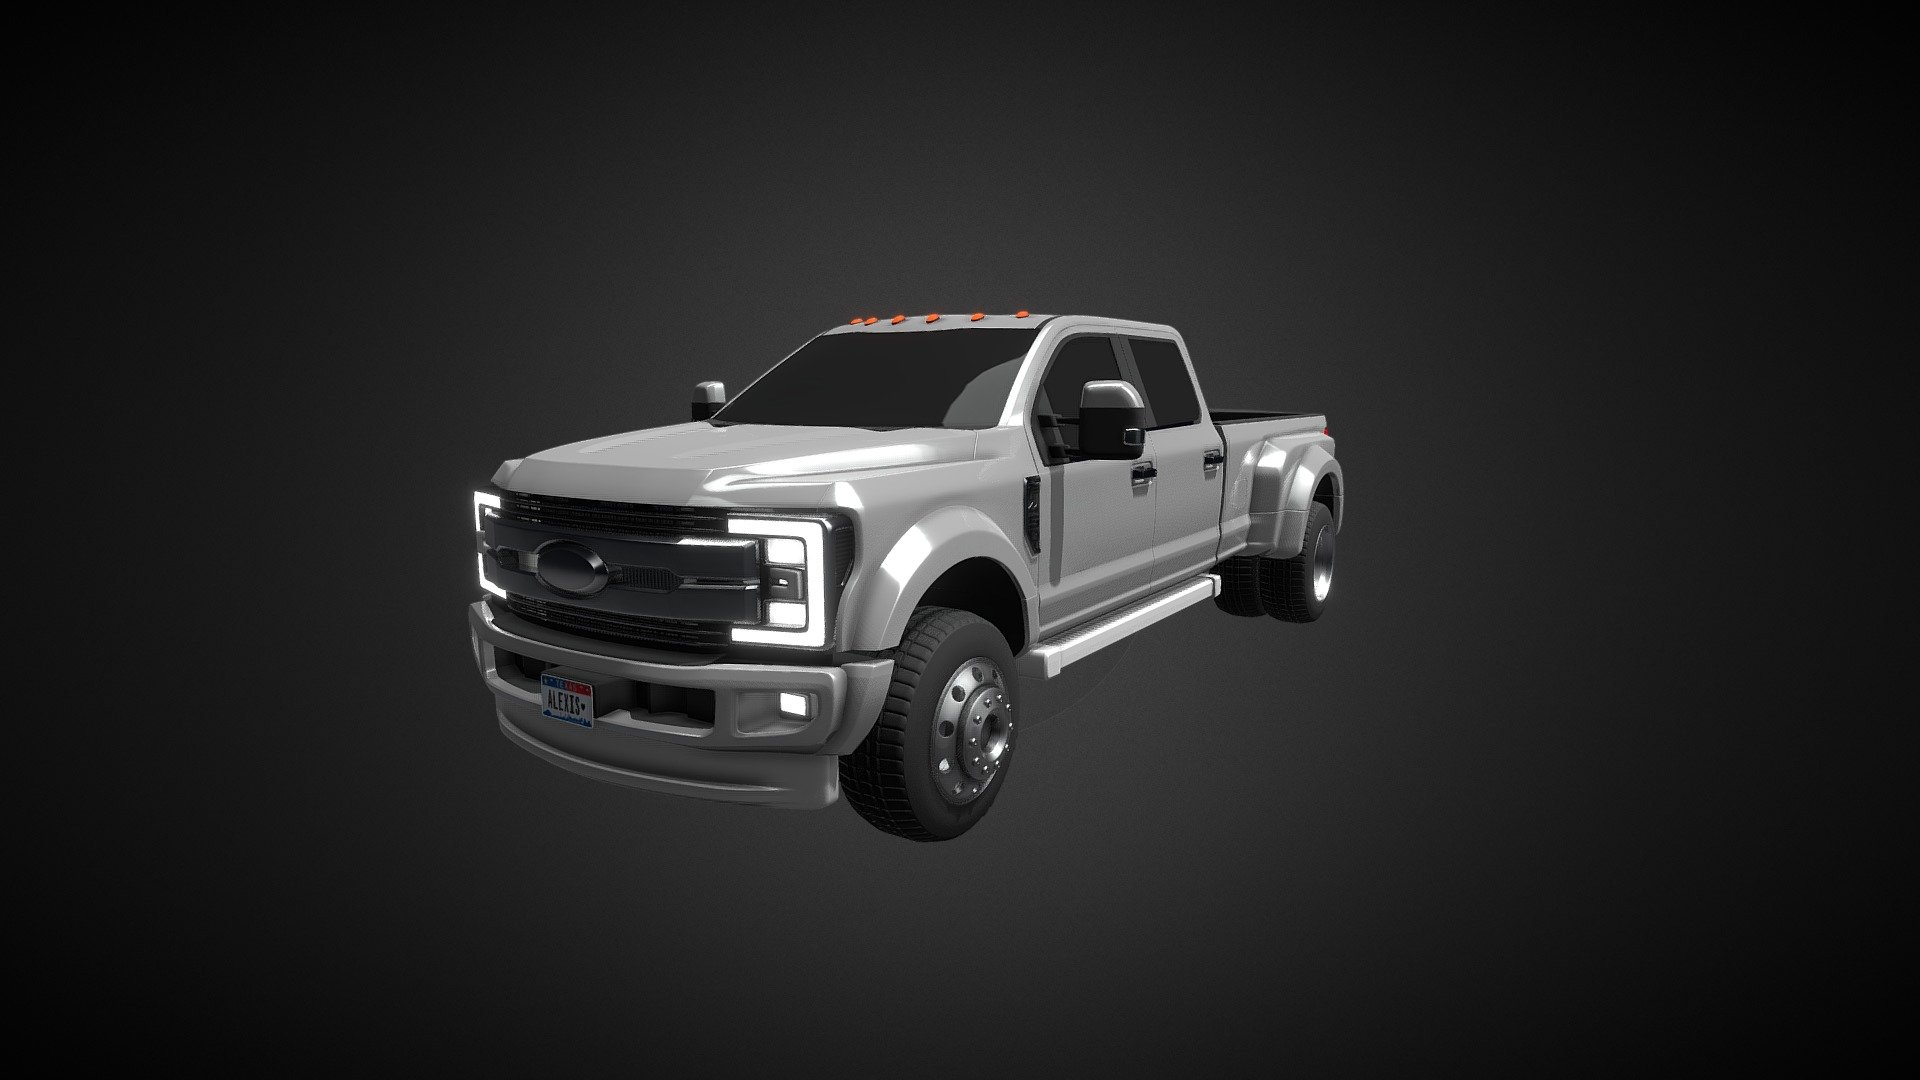 ford f450 high duty 2019 modeled in blender by me - ford f450 high duty 2019 - 3D model by Amir_hmi 3d model